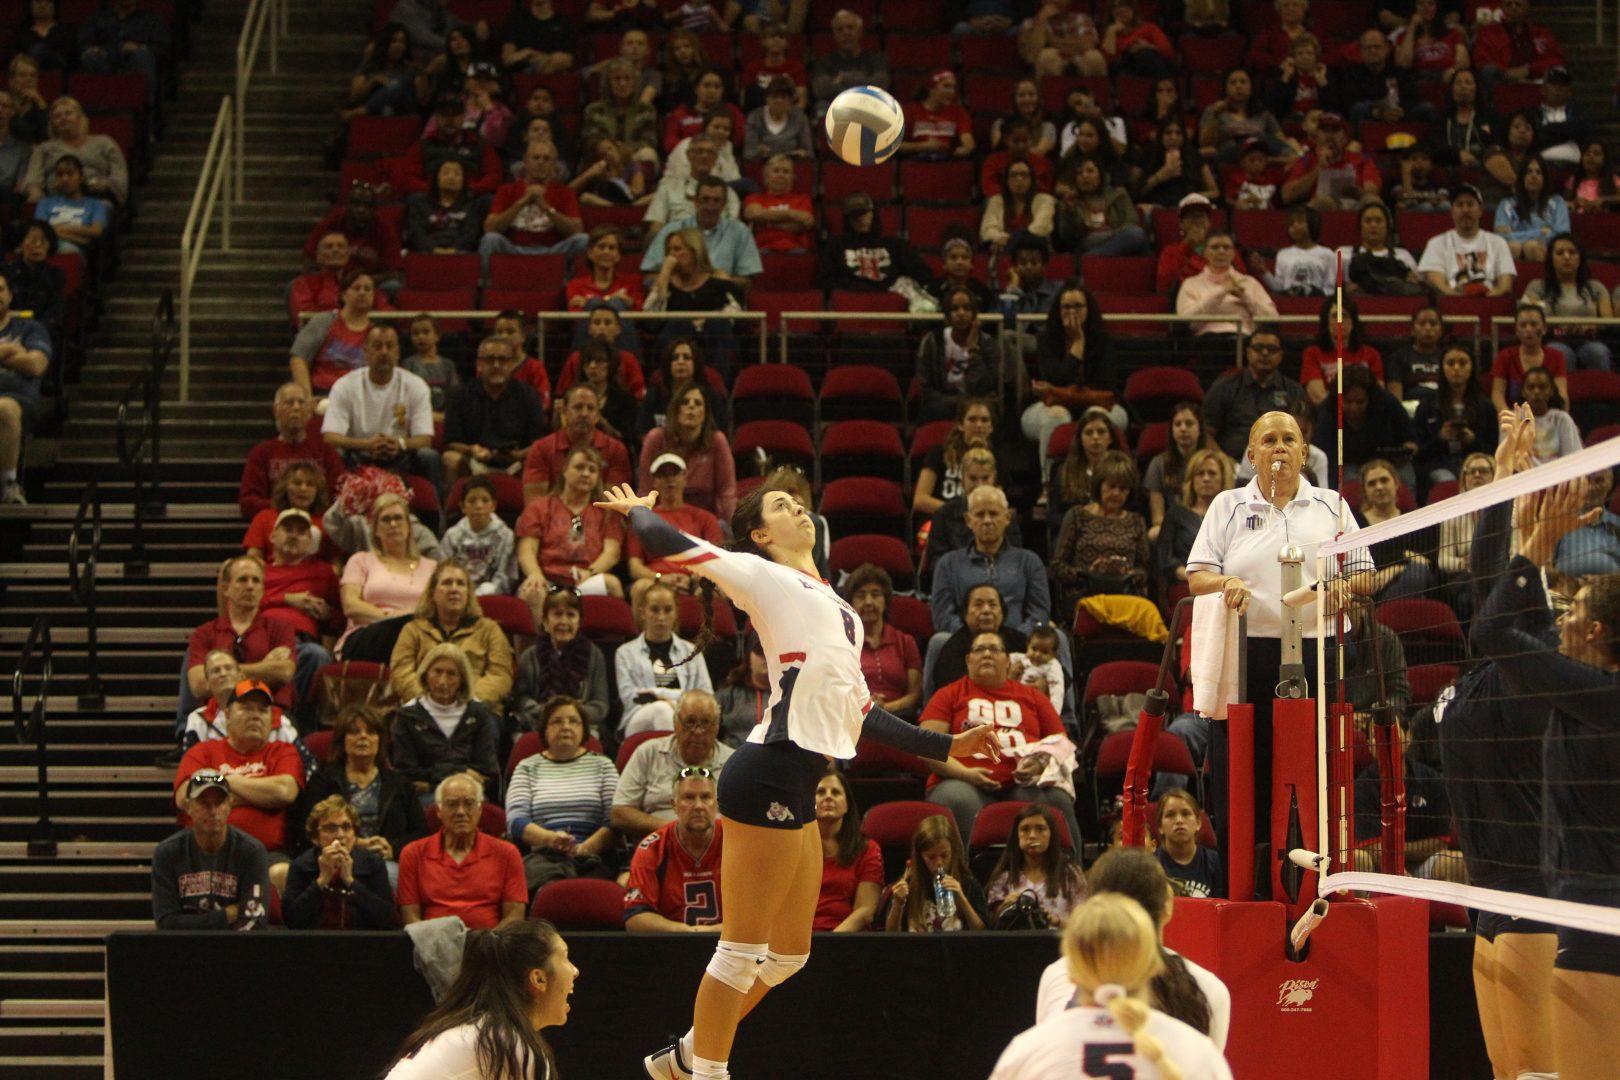 Bulldogs+senior+Taylor+Slover+leaps+for+the+ball+during+a+match+at+home+against+Utah+State+on+Nov.+3.+%28Courtesy+Fresno+State+Athletics%29